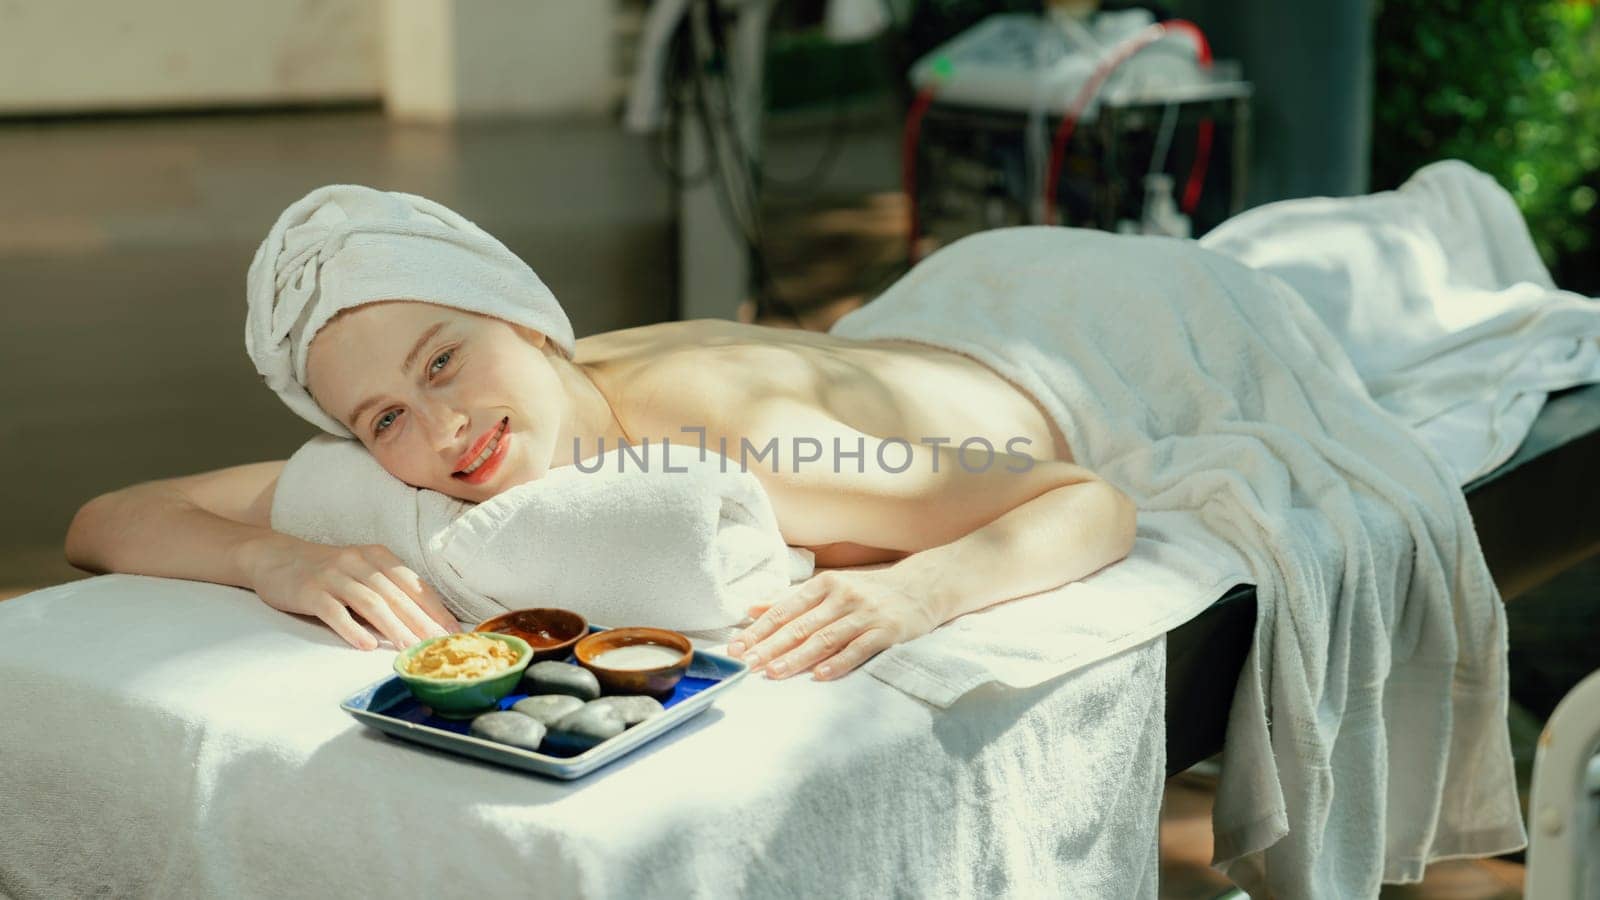 Relaxing beautiful young woman lies on spa bed near ingredients of homemade facial mask while looking at camera surrounded by beauty electrical equipment. Healthy and beauty concept. Tranquility.